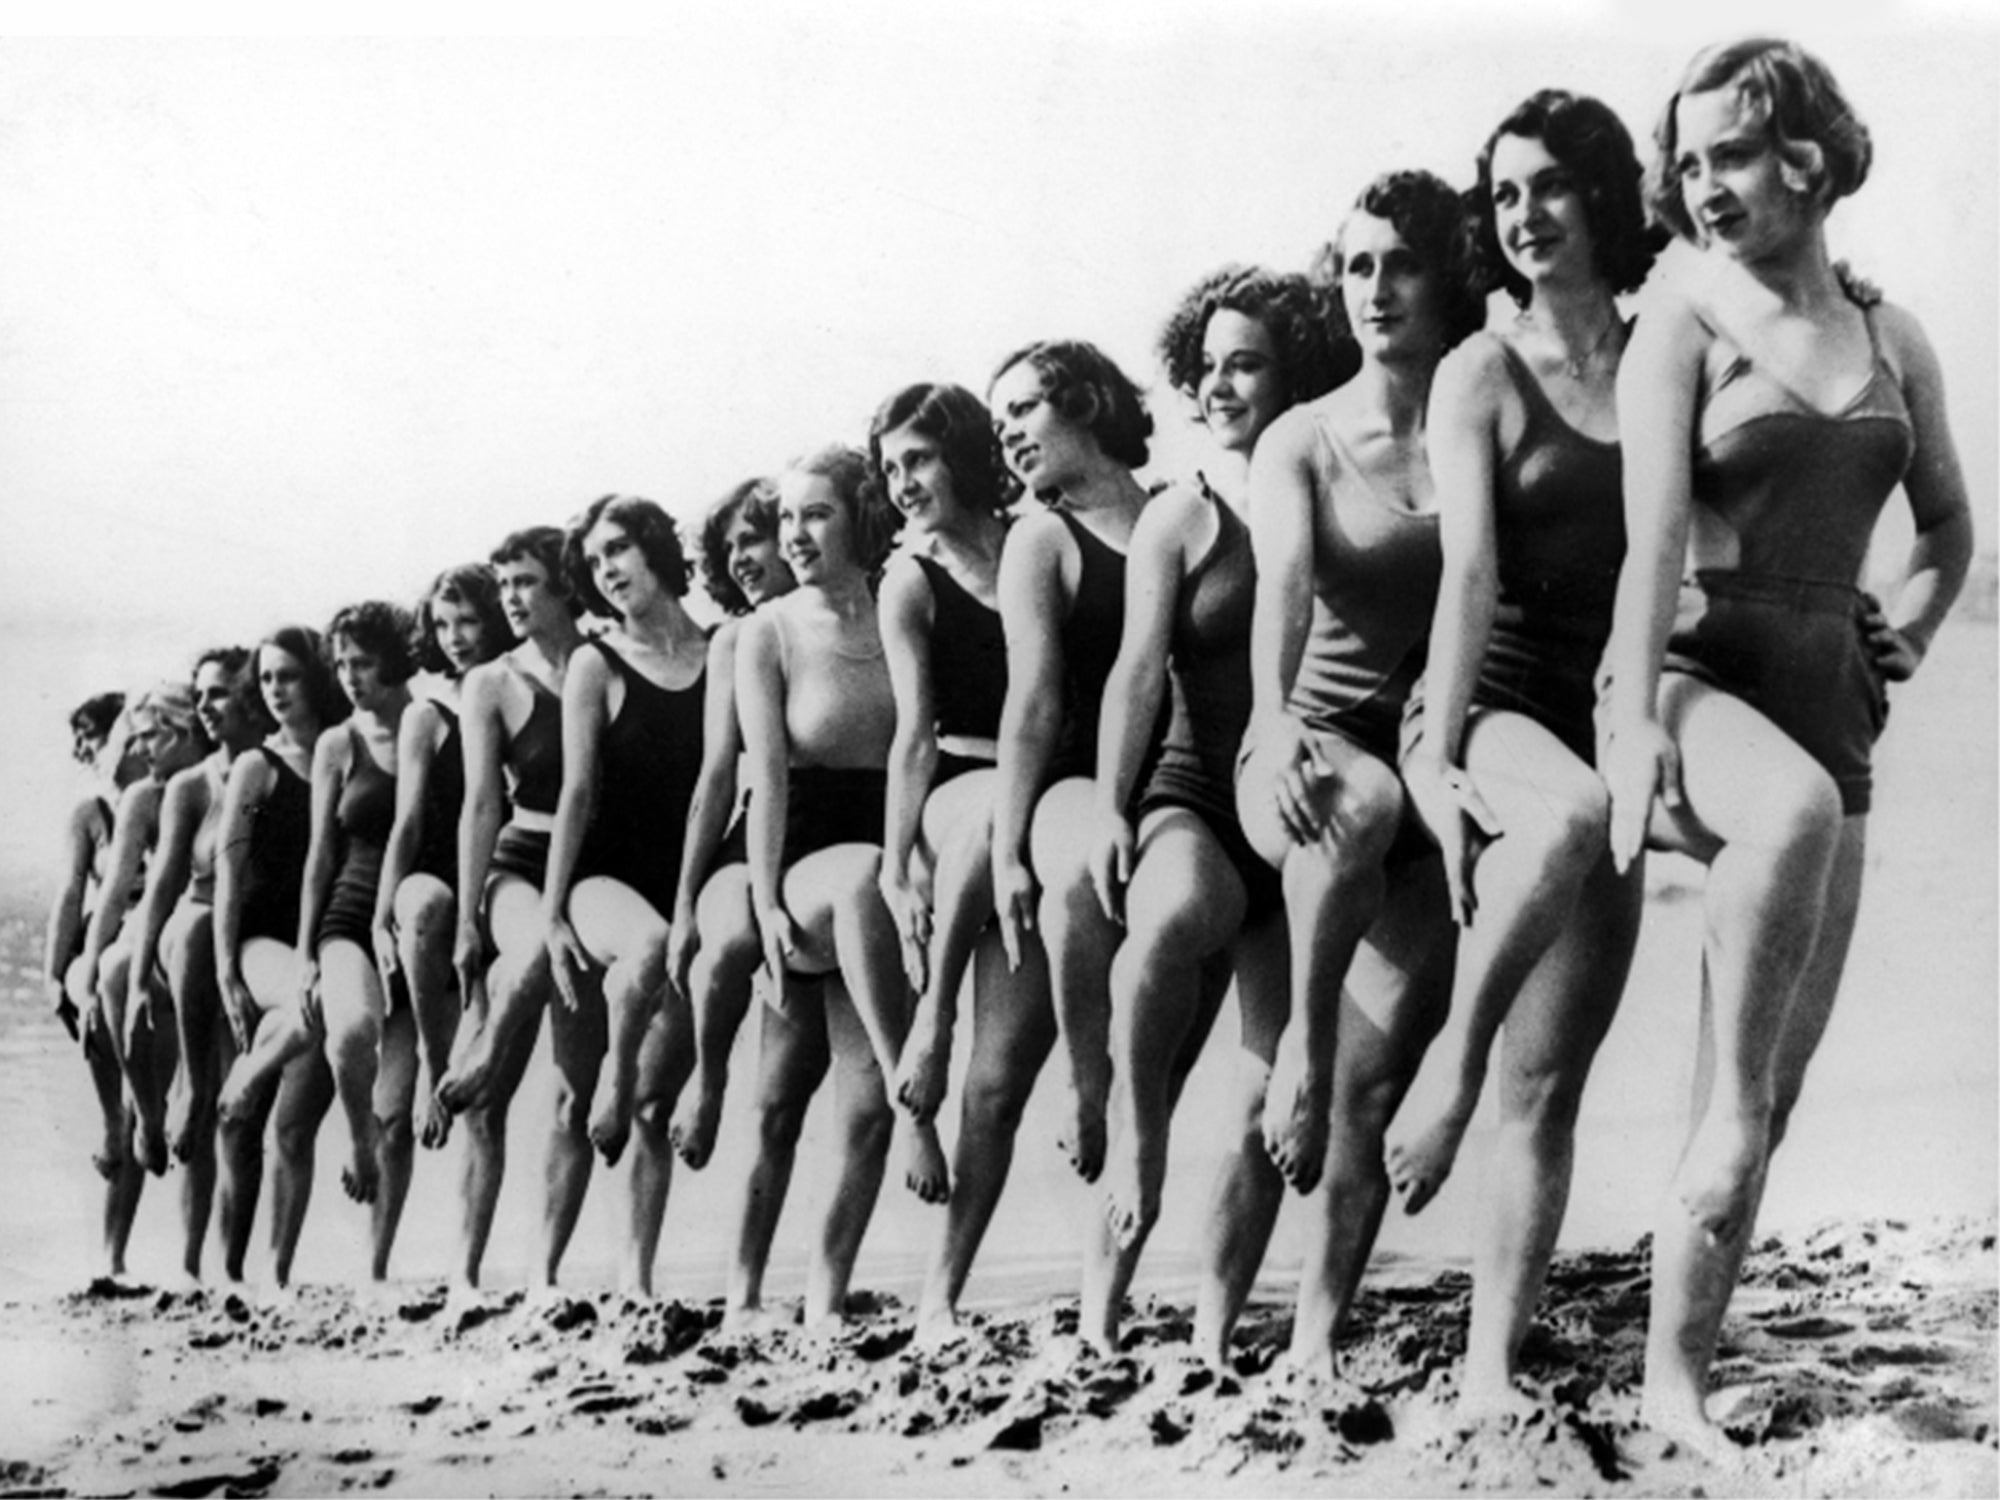 THE HISTORY OF THE SWIMSUIT